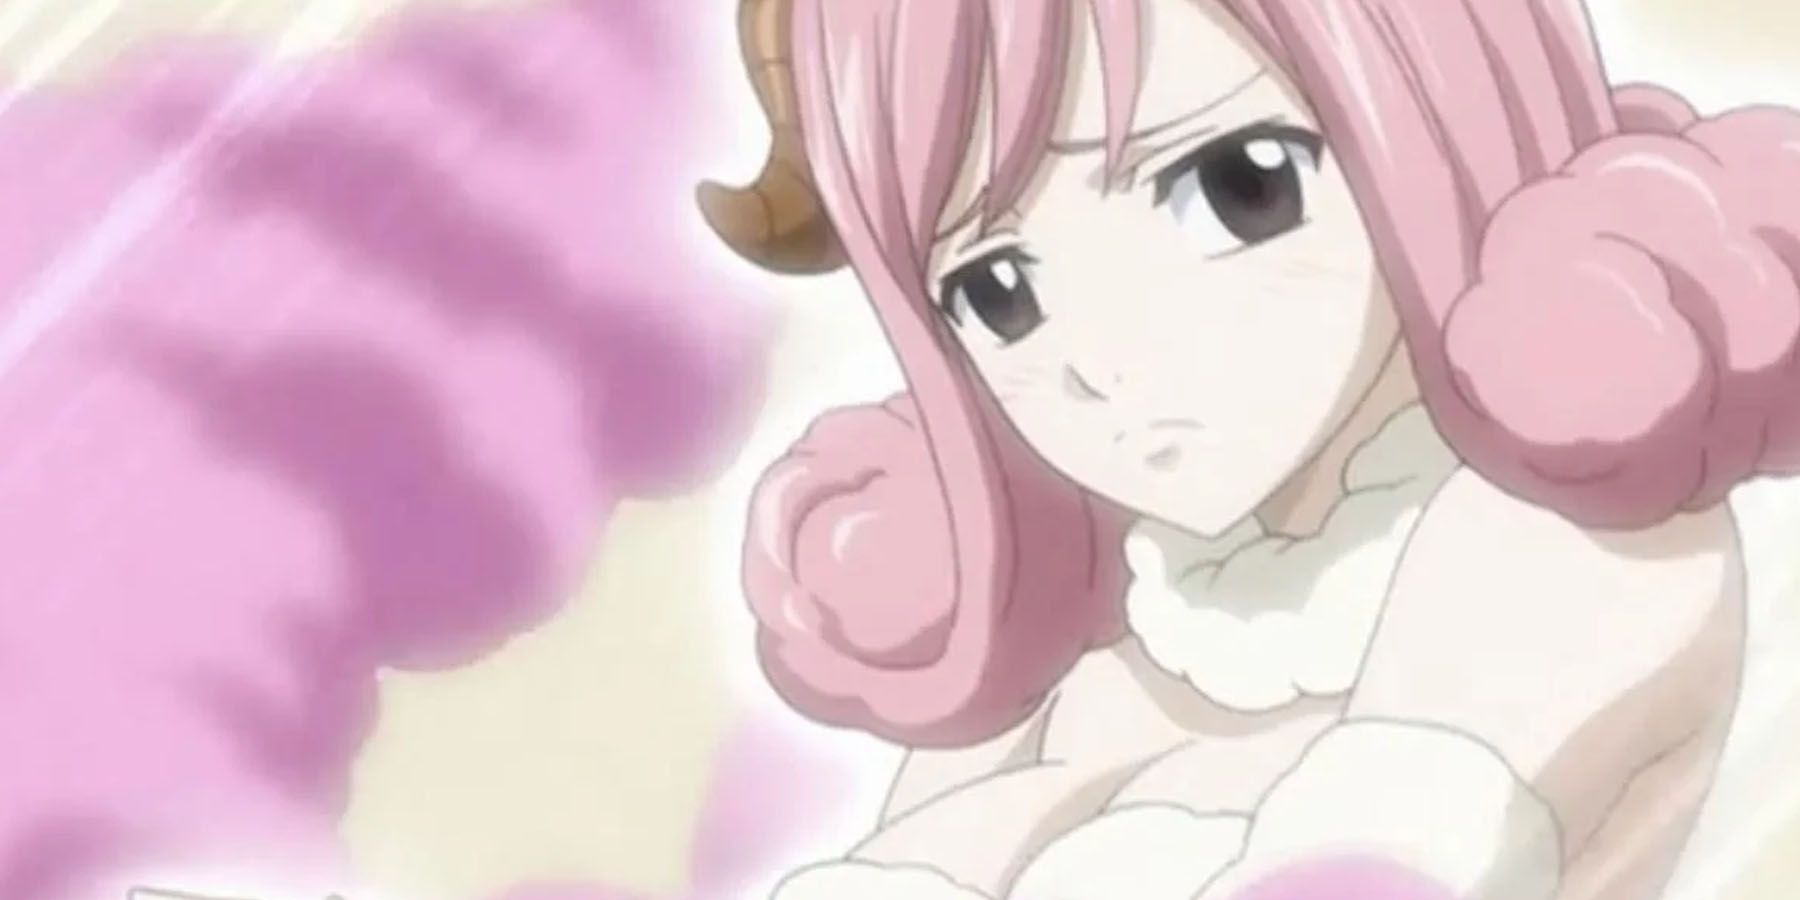 Aries of Fairy Tail